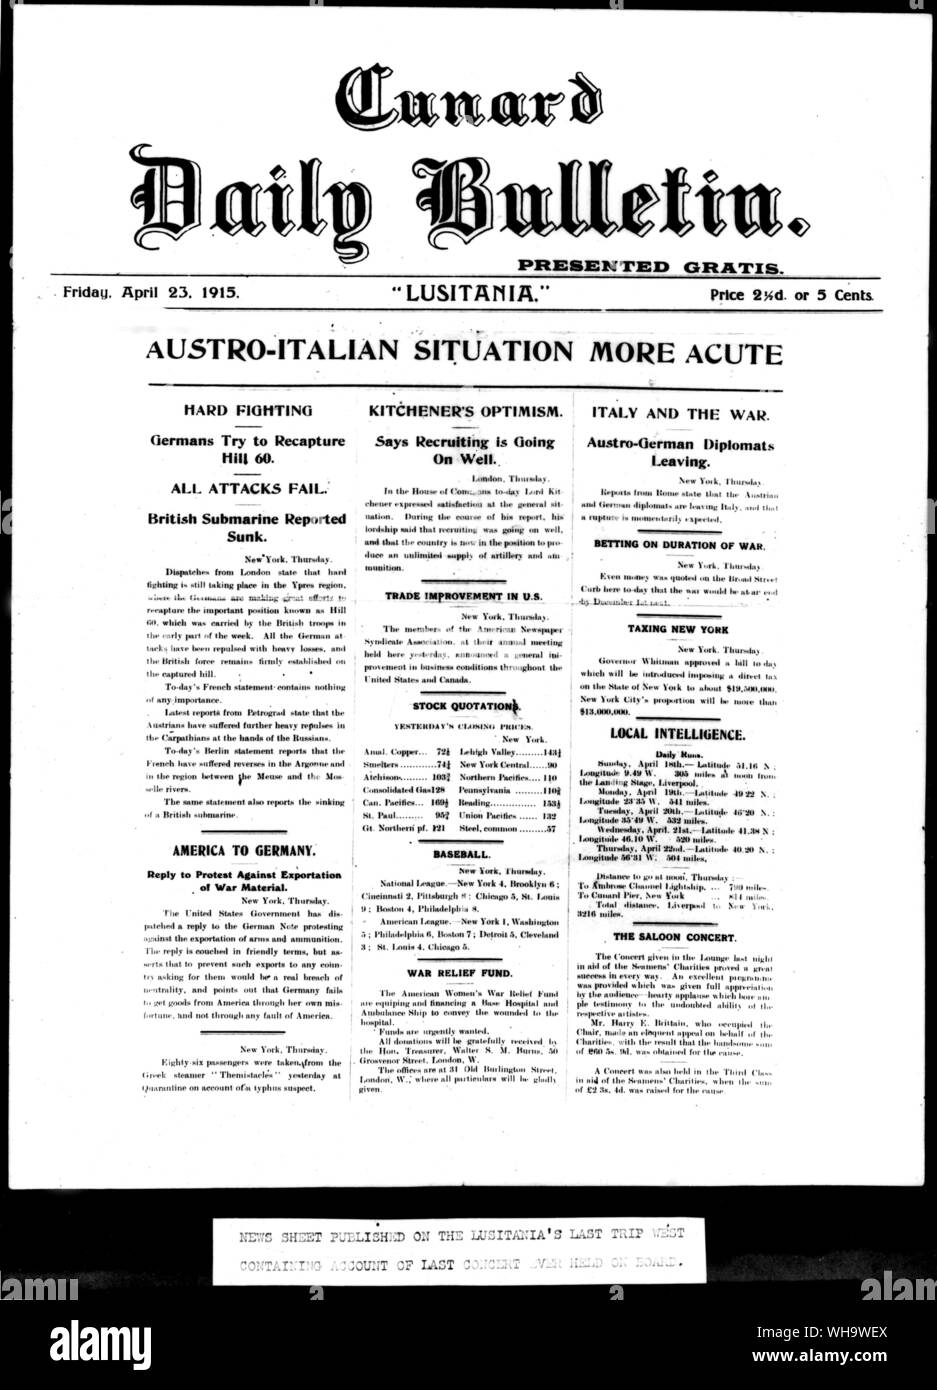 WW1/ Cunard Daily Bulletin. April 23rd 1915. News sheet published on the 'Lusitania's' last trip containing of last concert ever held on board Stock Photo